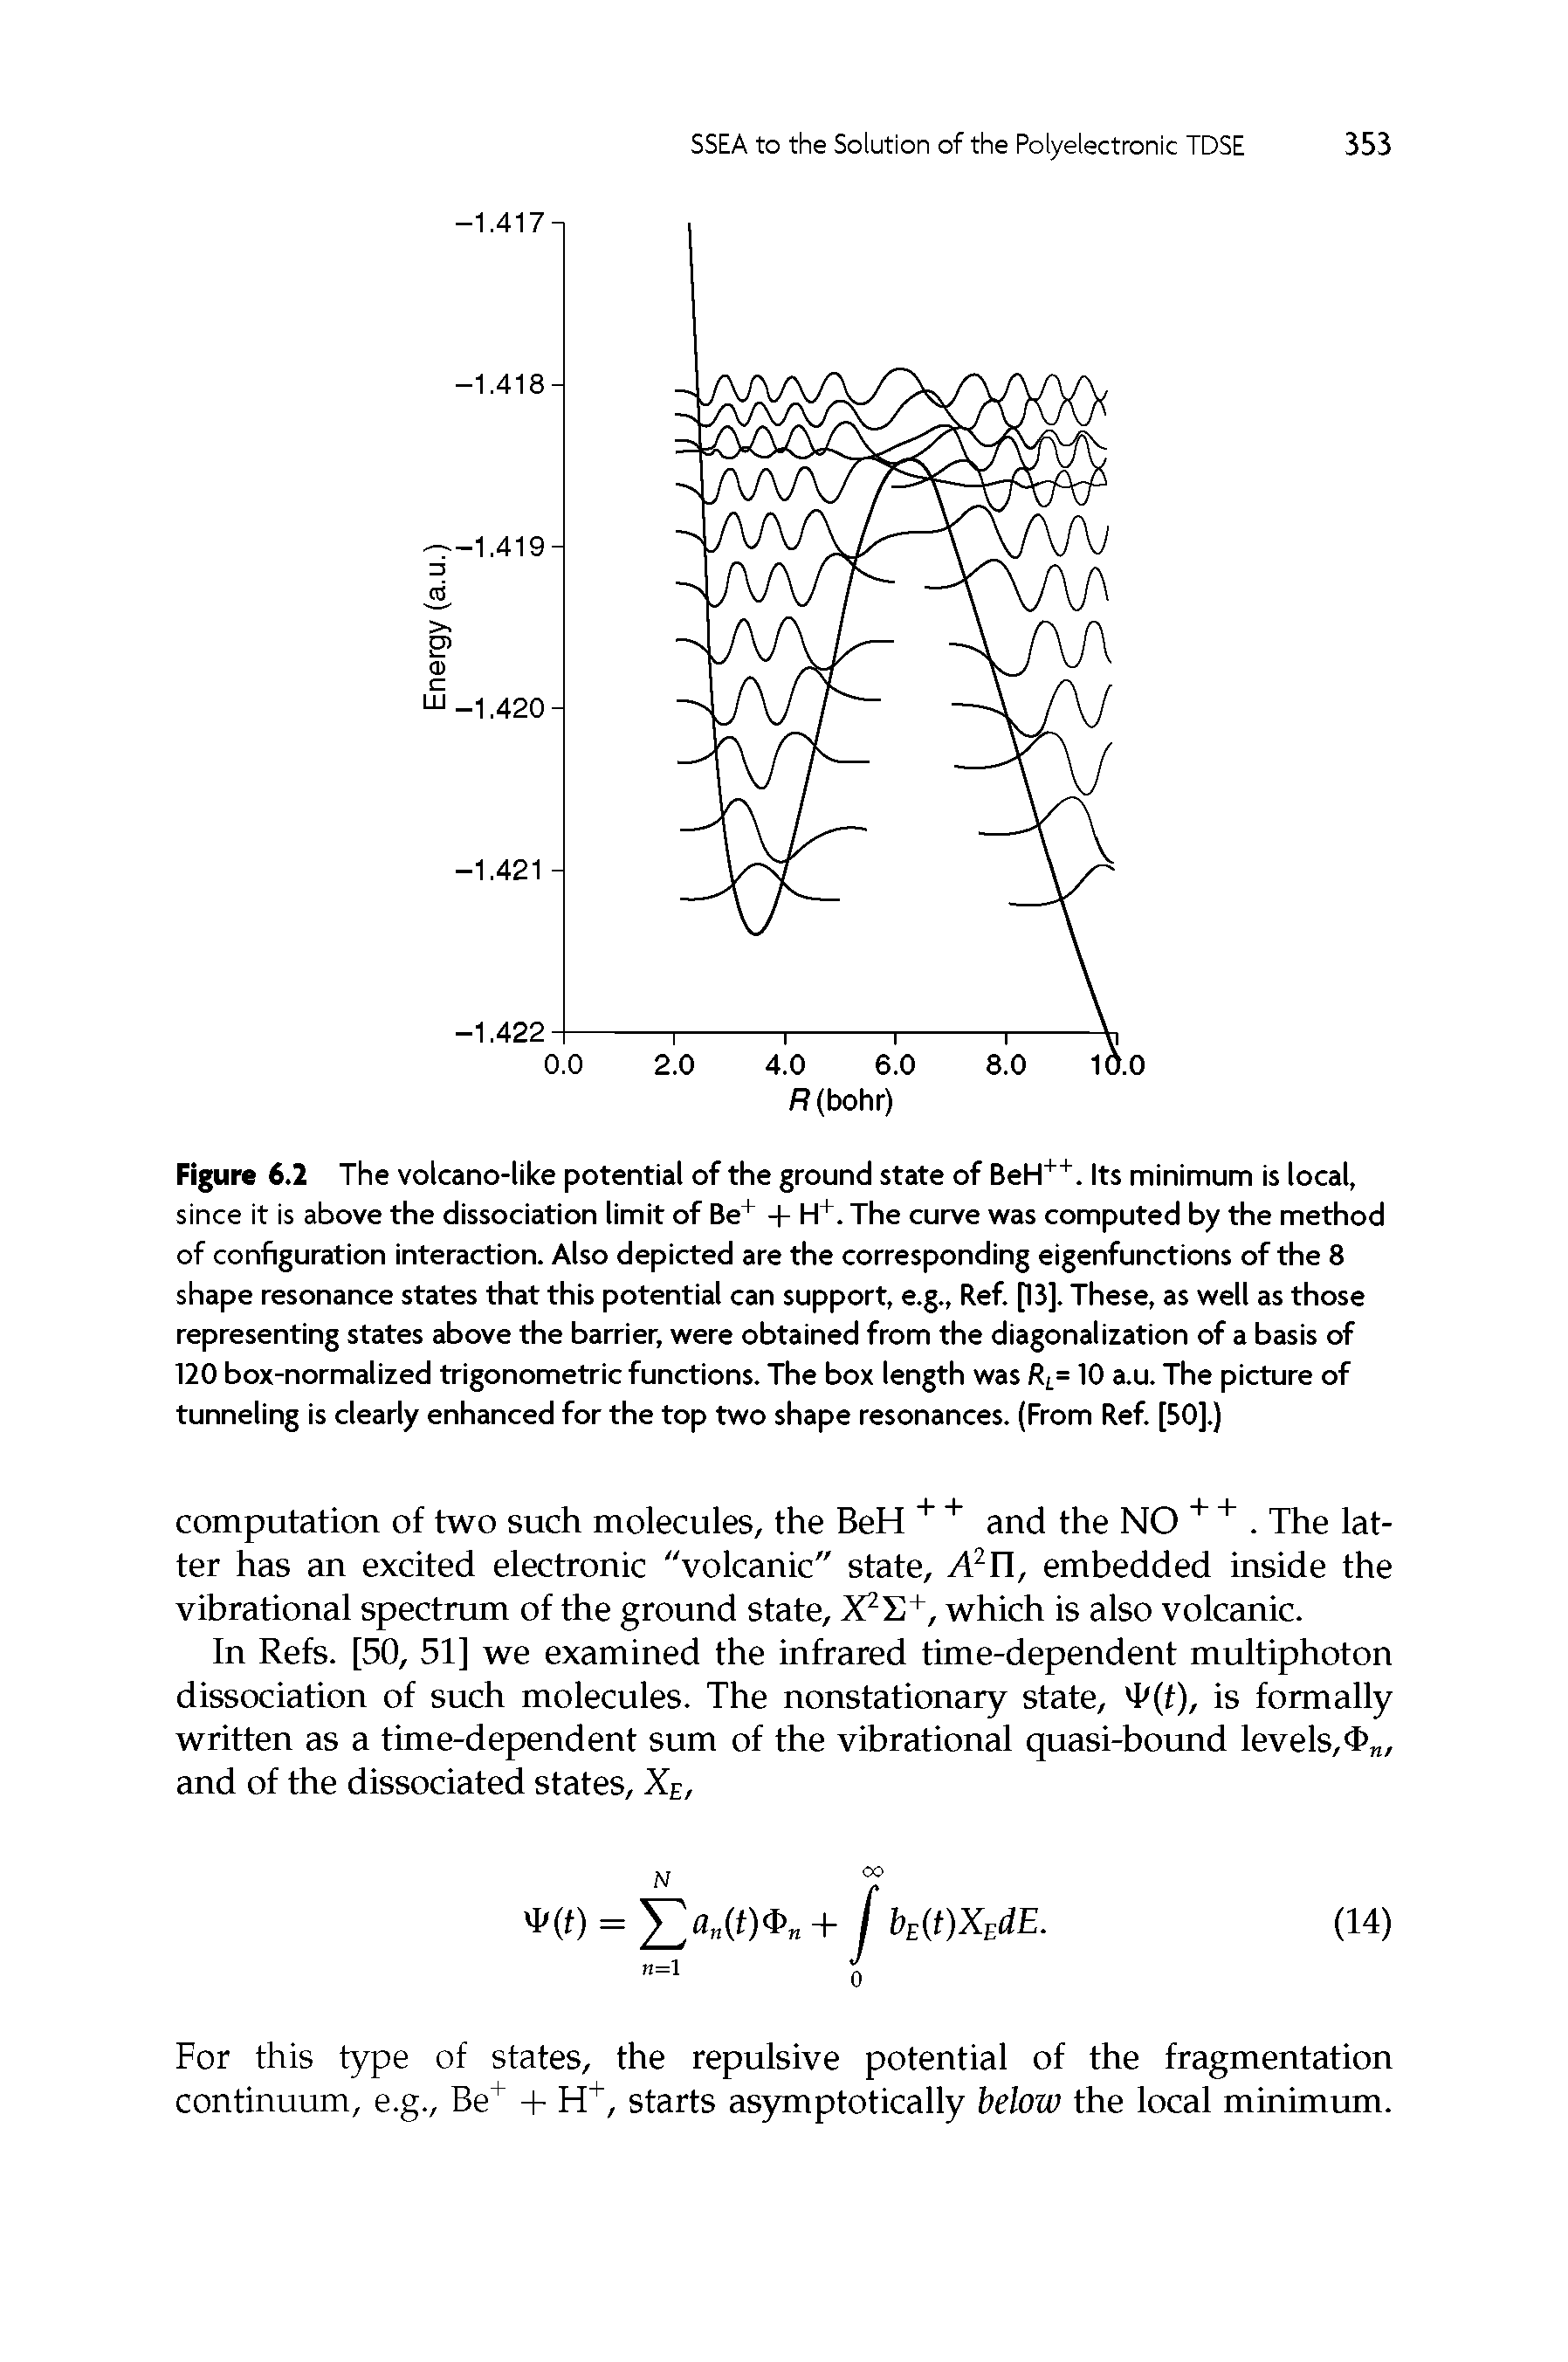 Figure 6.2 The volcano-like potential of the ground state of BeH ". Its minimum is local, since it is above the dissociation limit of Be - - H. The curve was computed by the method of configuration interaction. Also depicted are the corresponding eigenfunctions of the 8 shape resonance states that this potential can support, e.g.. Ref p3]. These, as well as those representing states above the barrier, were obtained from the diagonalization of a basis of 120 box-normalized trigonometric functions. The box length was Ri= 10 a.u. The picture of tunneling is clearly enhanced for the top two shape resonances. (From Ref [50].)...